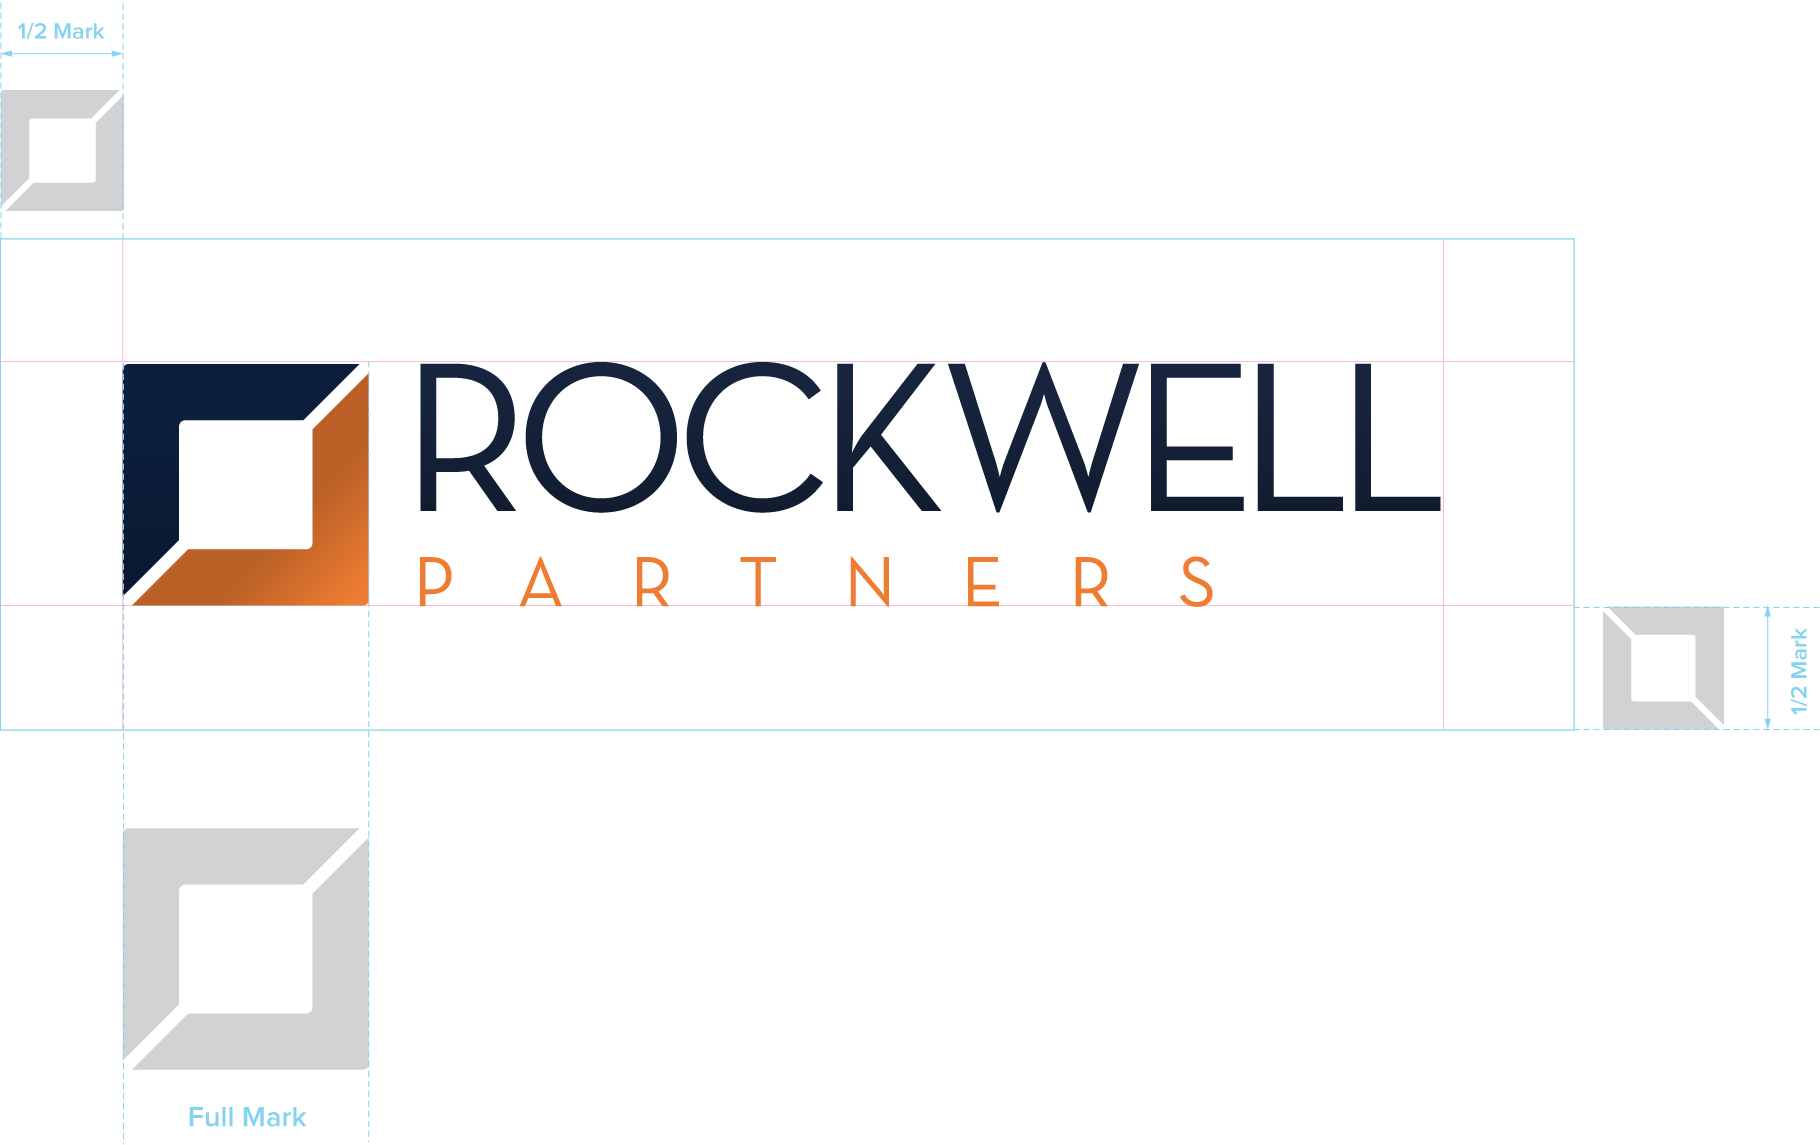 Rockwell Partners Logo Clear space